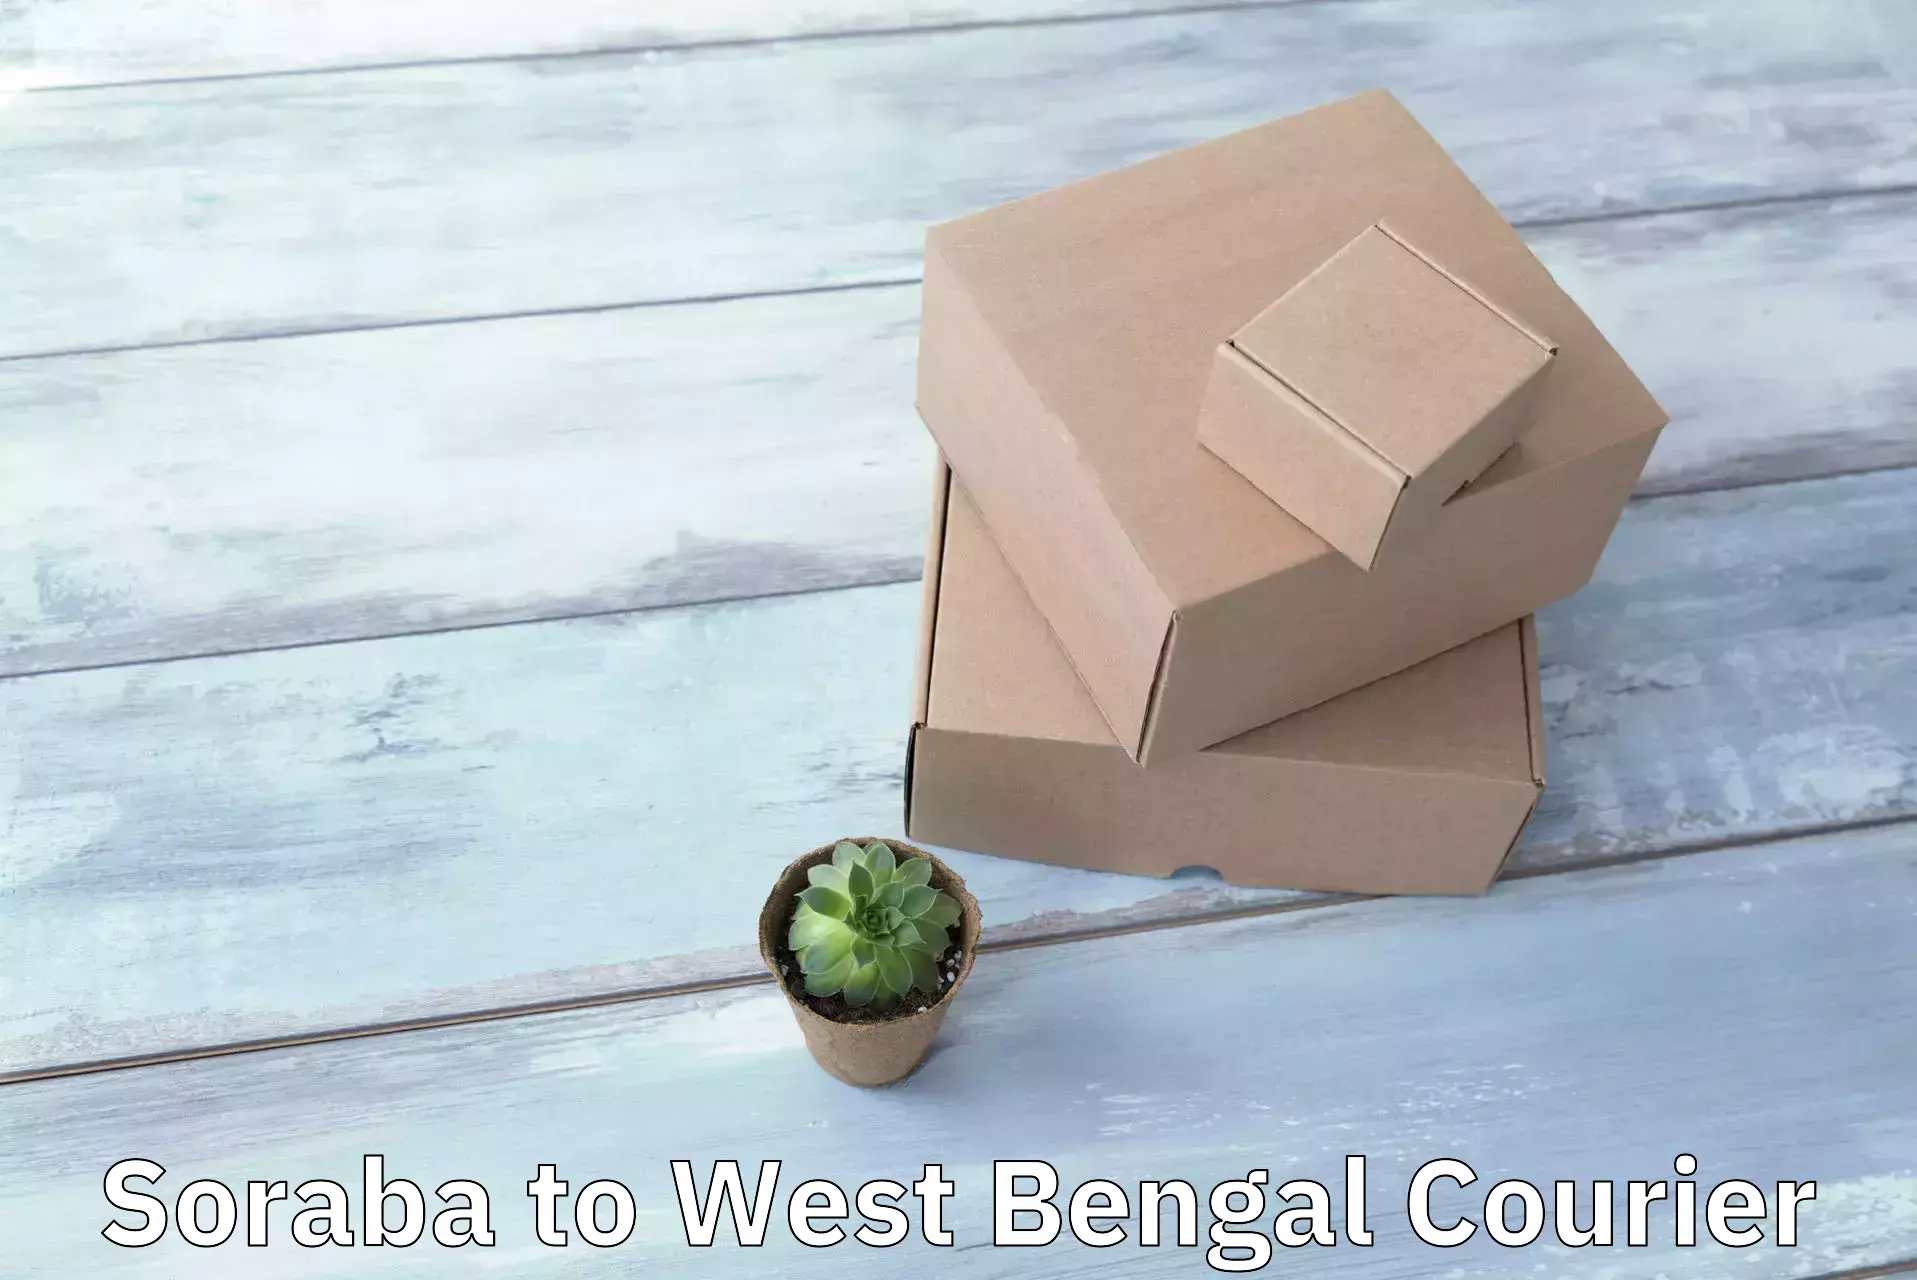 Subscription-based courier Soraba to West Bengal